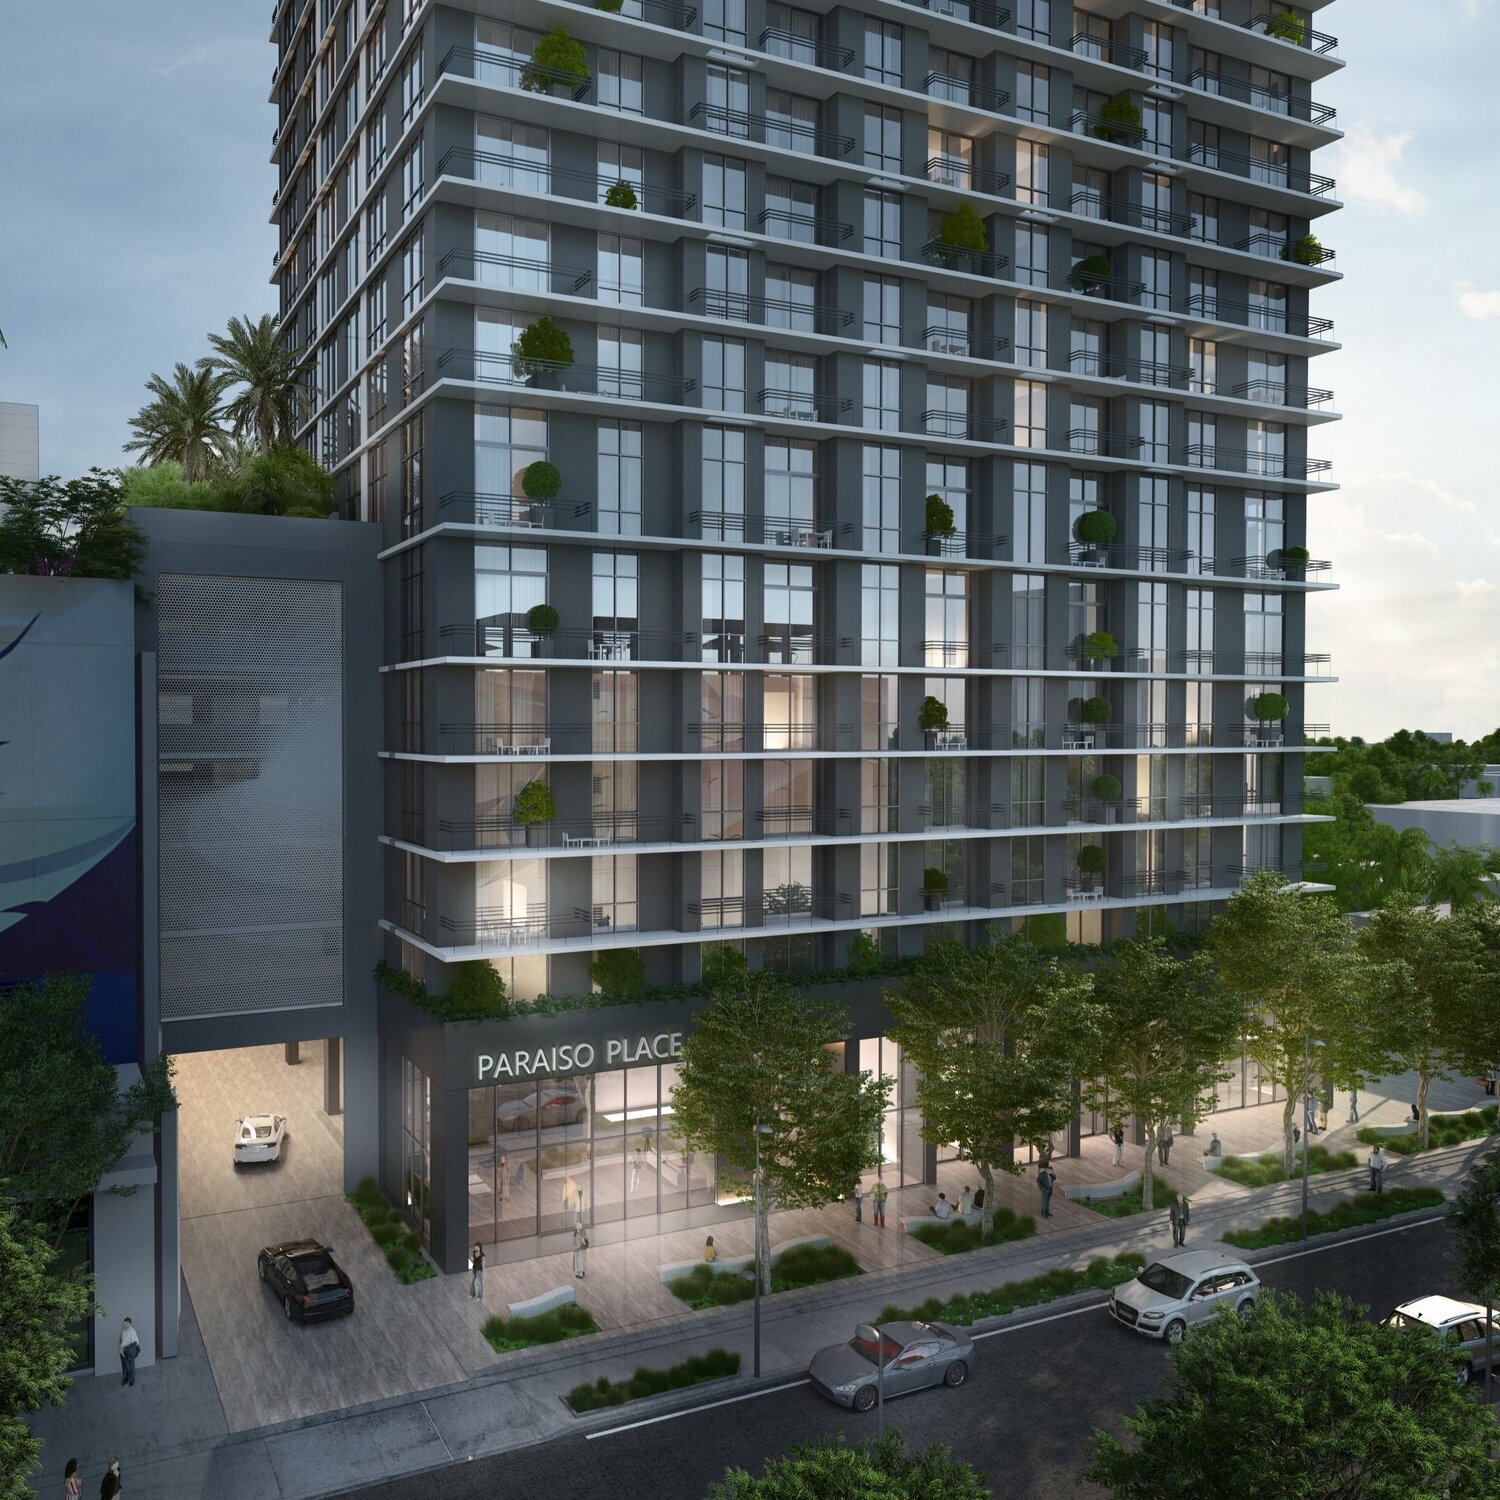 Metro Edgewater. Designed by Burgos Lanza Architects & Planners.